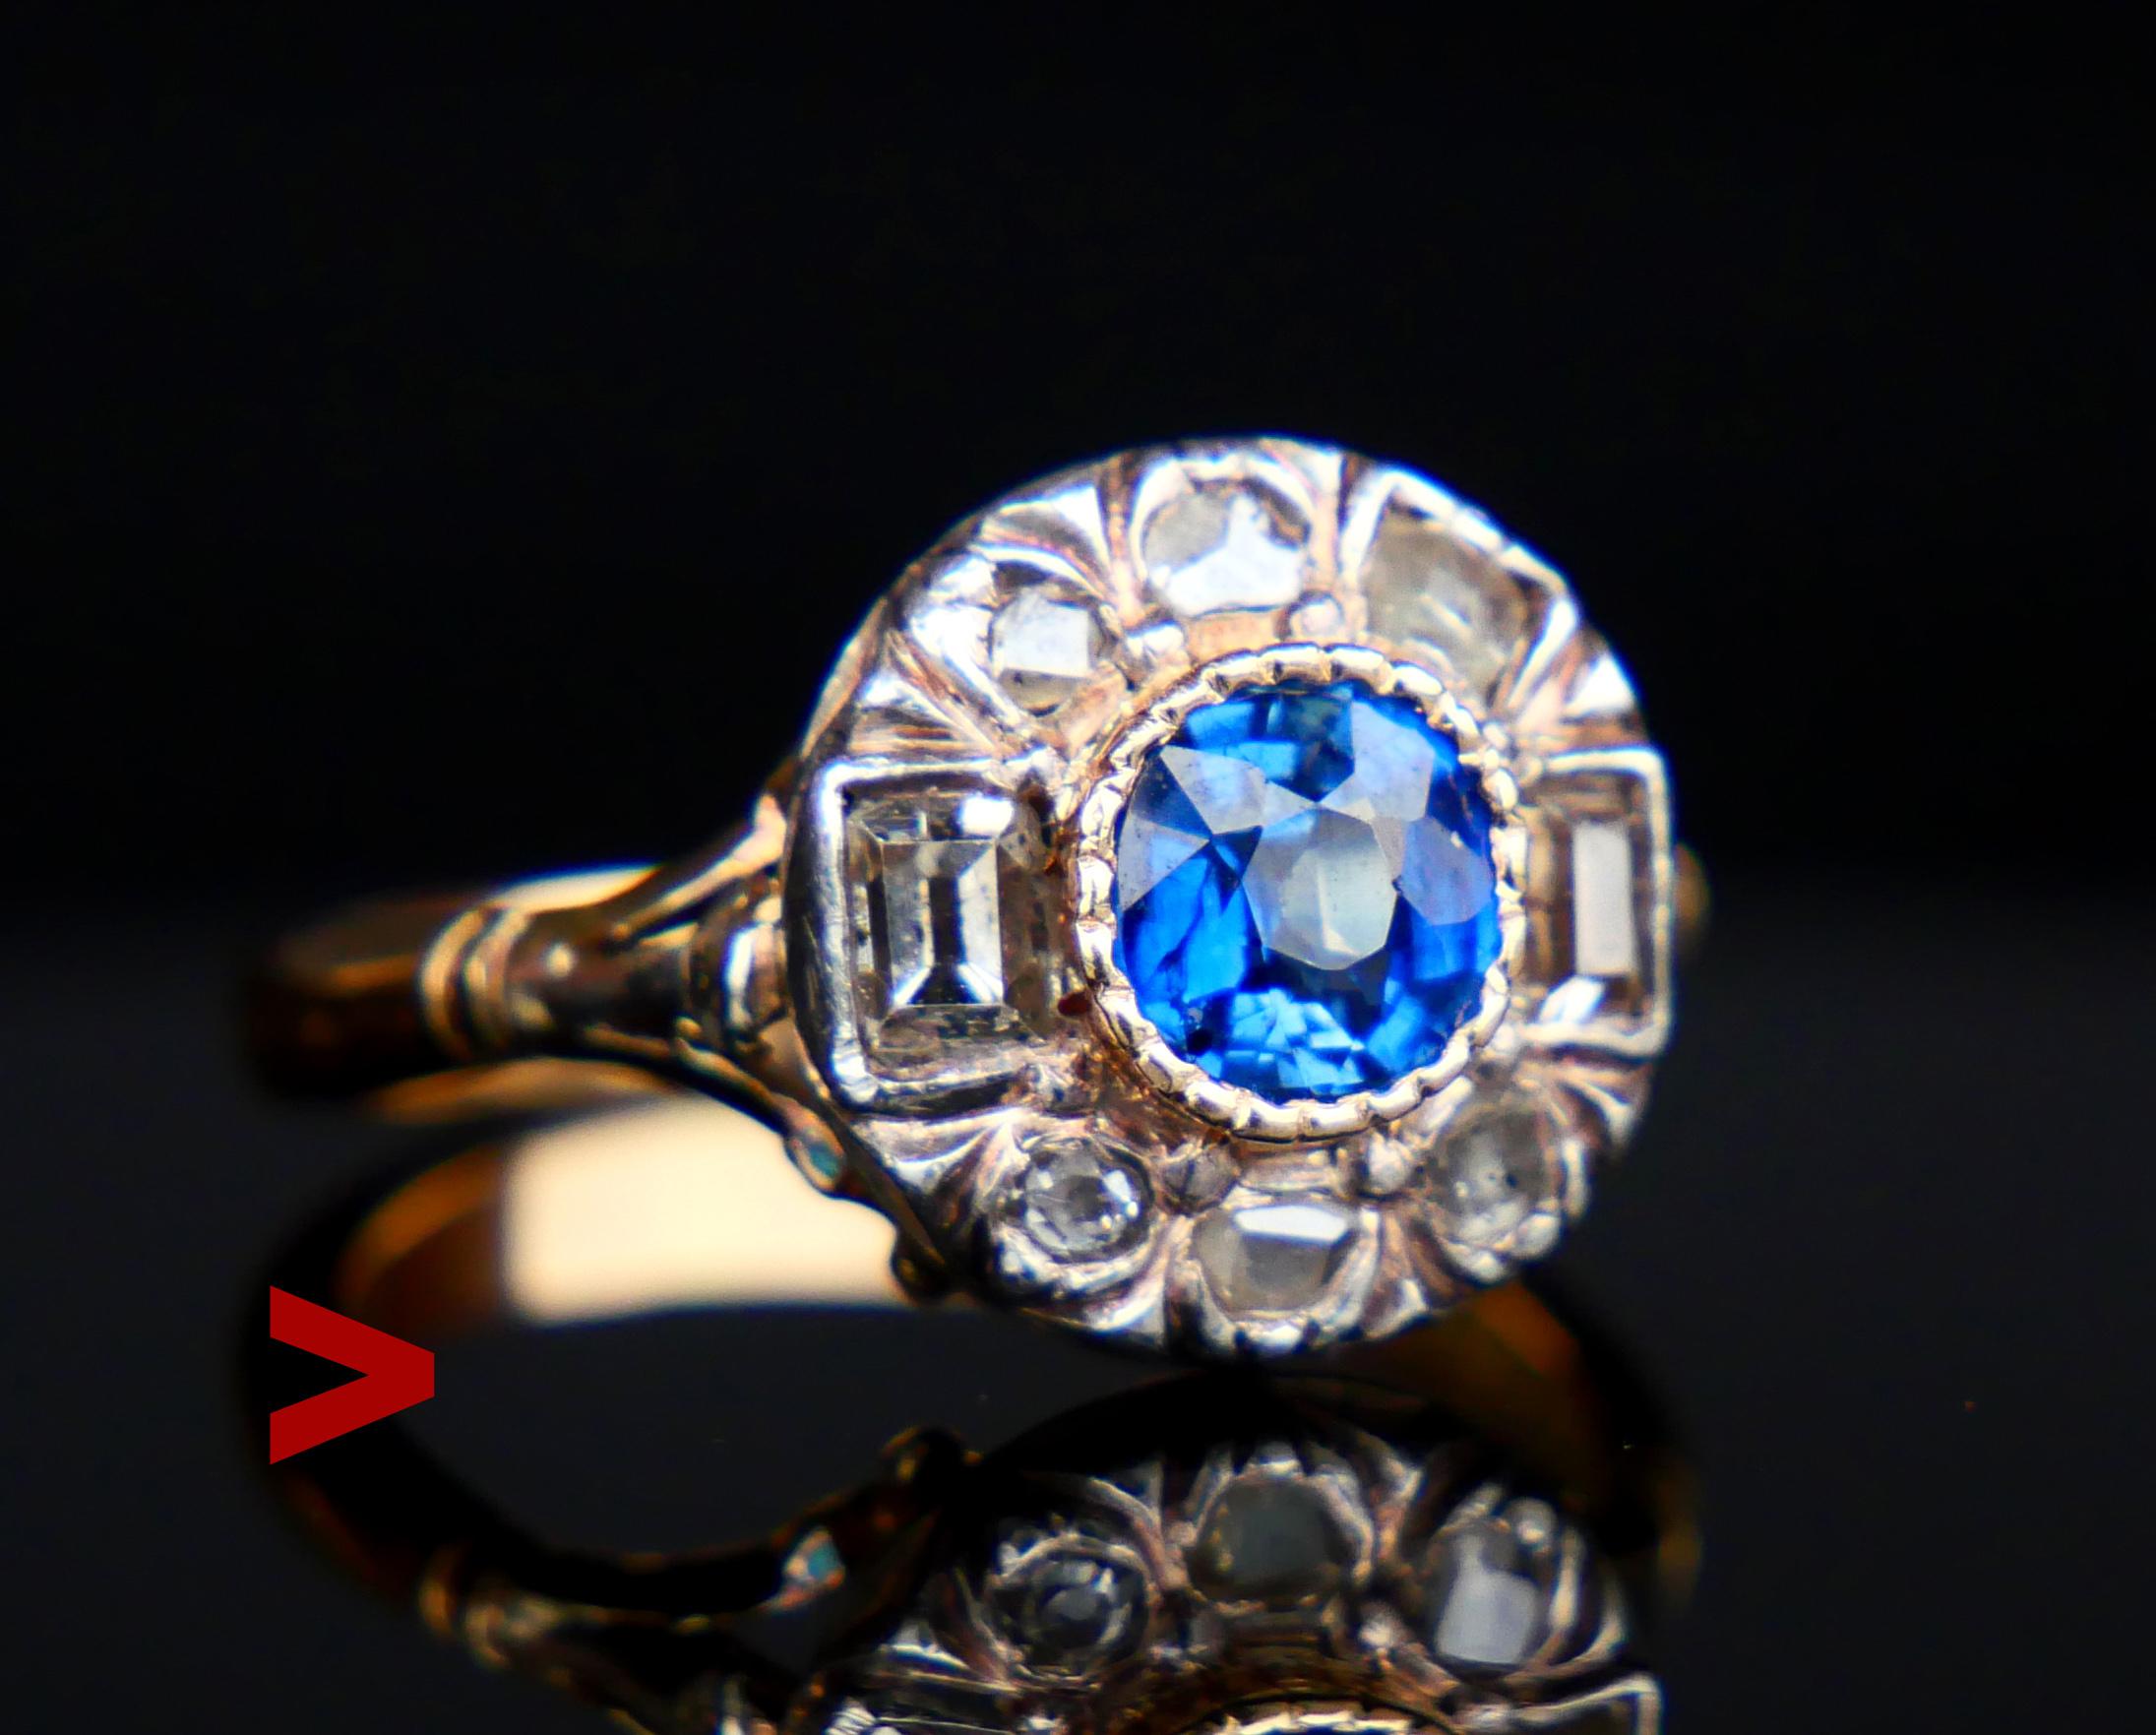 European Halo Ring with 18K White Gold on Yellow Gold crown featuring natural Blue Sapphire and 8 Diamonds of various old cuts.

Swedish hallmarks ,18K , maker's hallmarks . Date combination is missing. Made ca. early XX century.

Floret/ crown